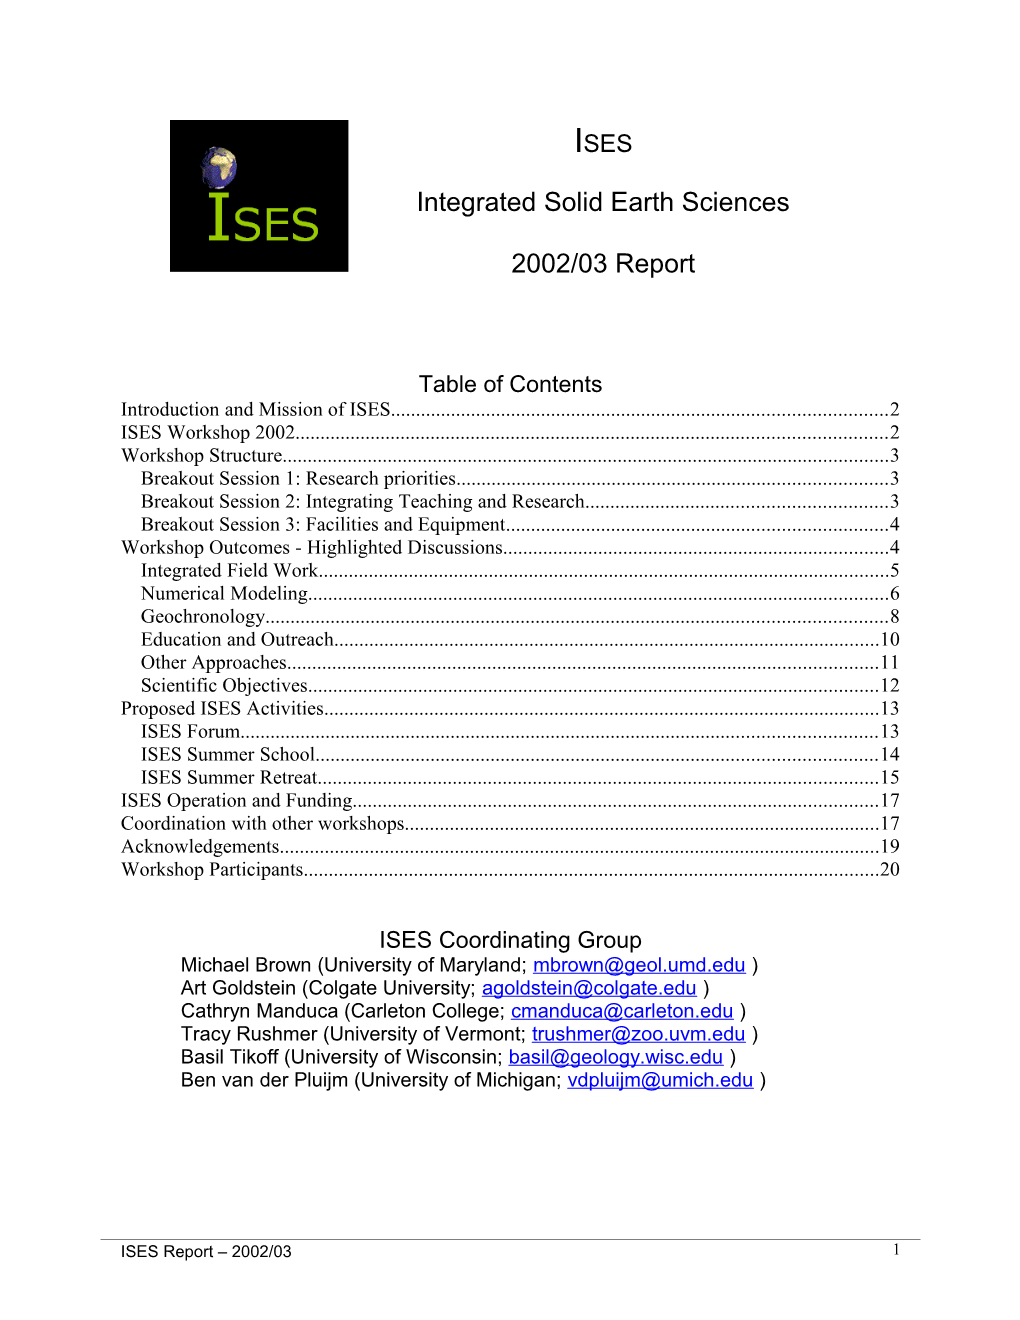 Integrated Solid Earth Sciences